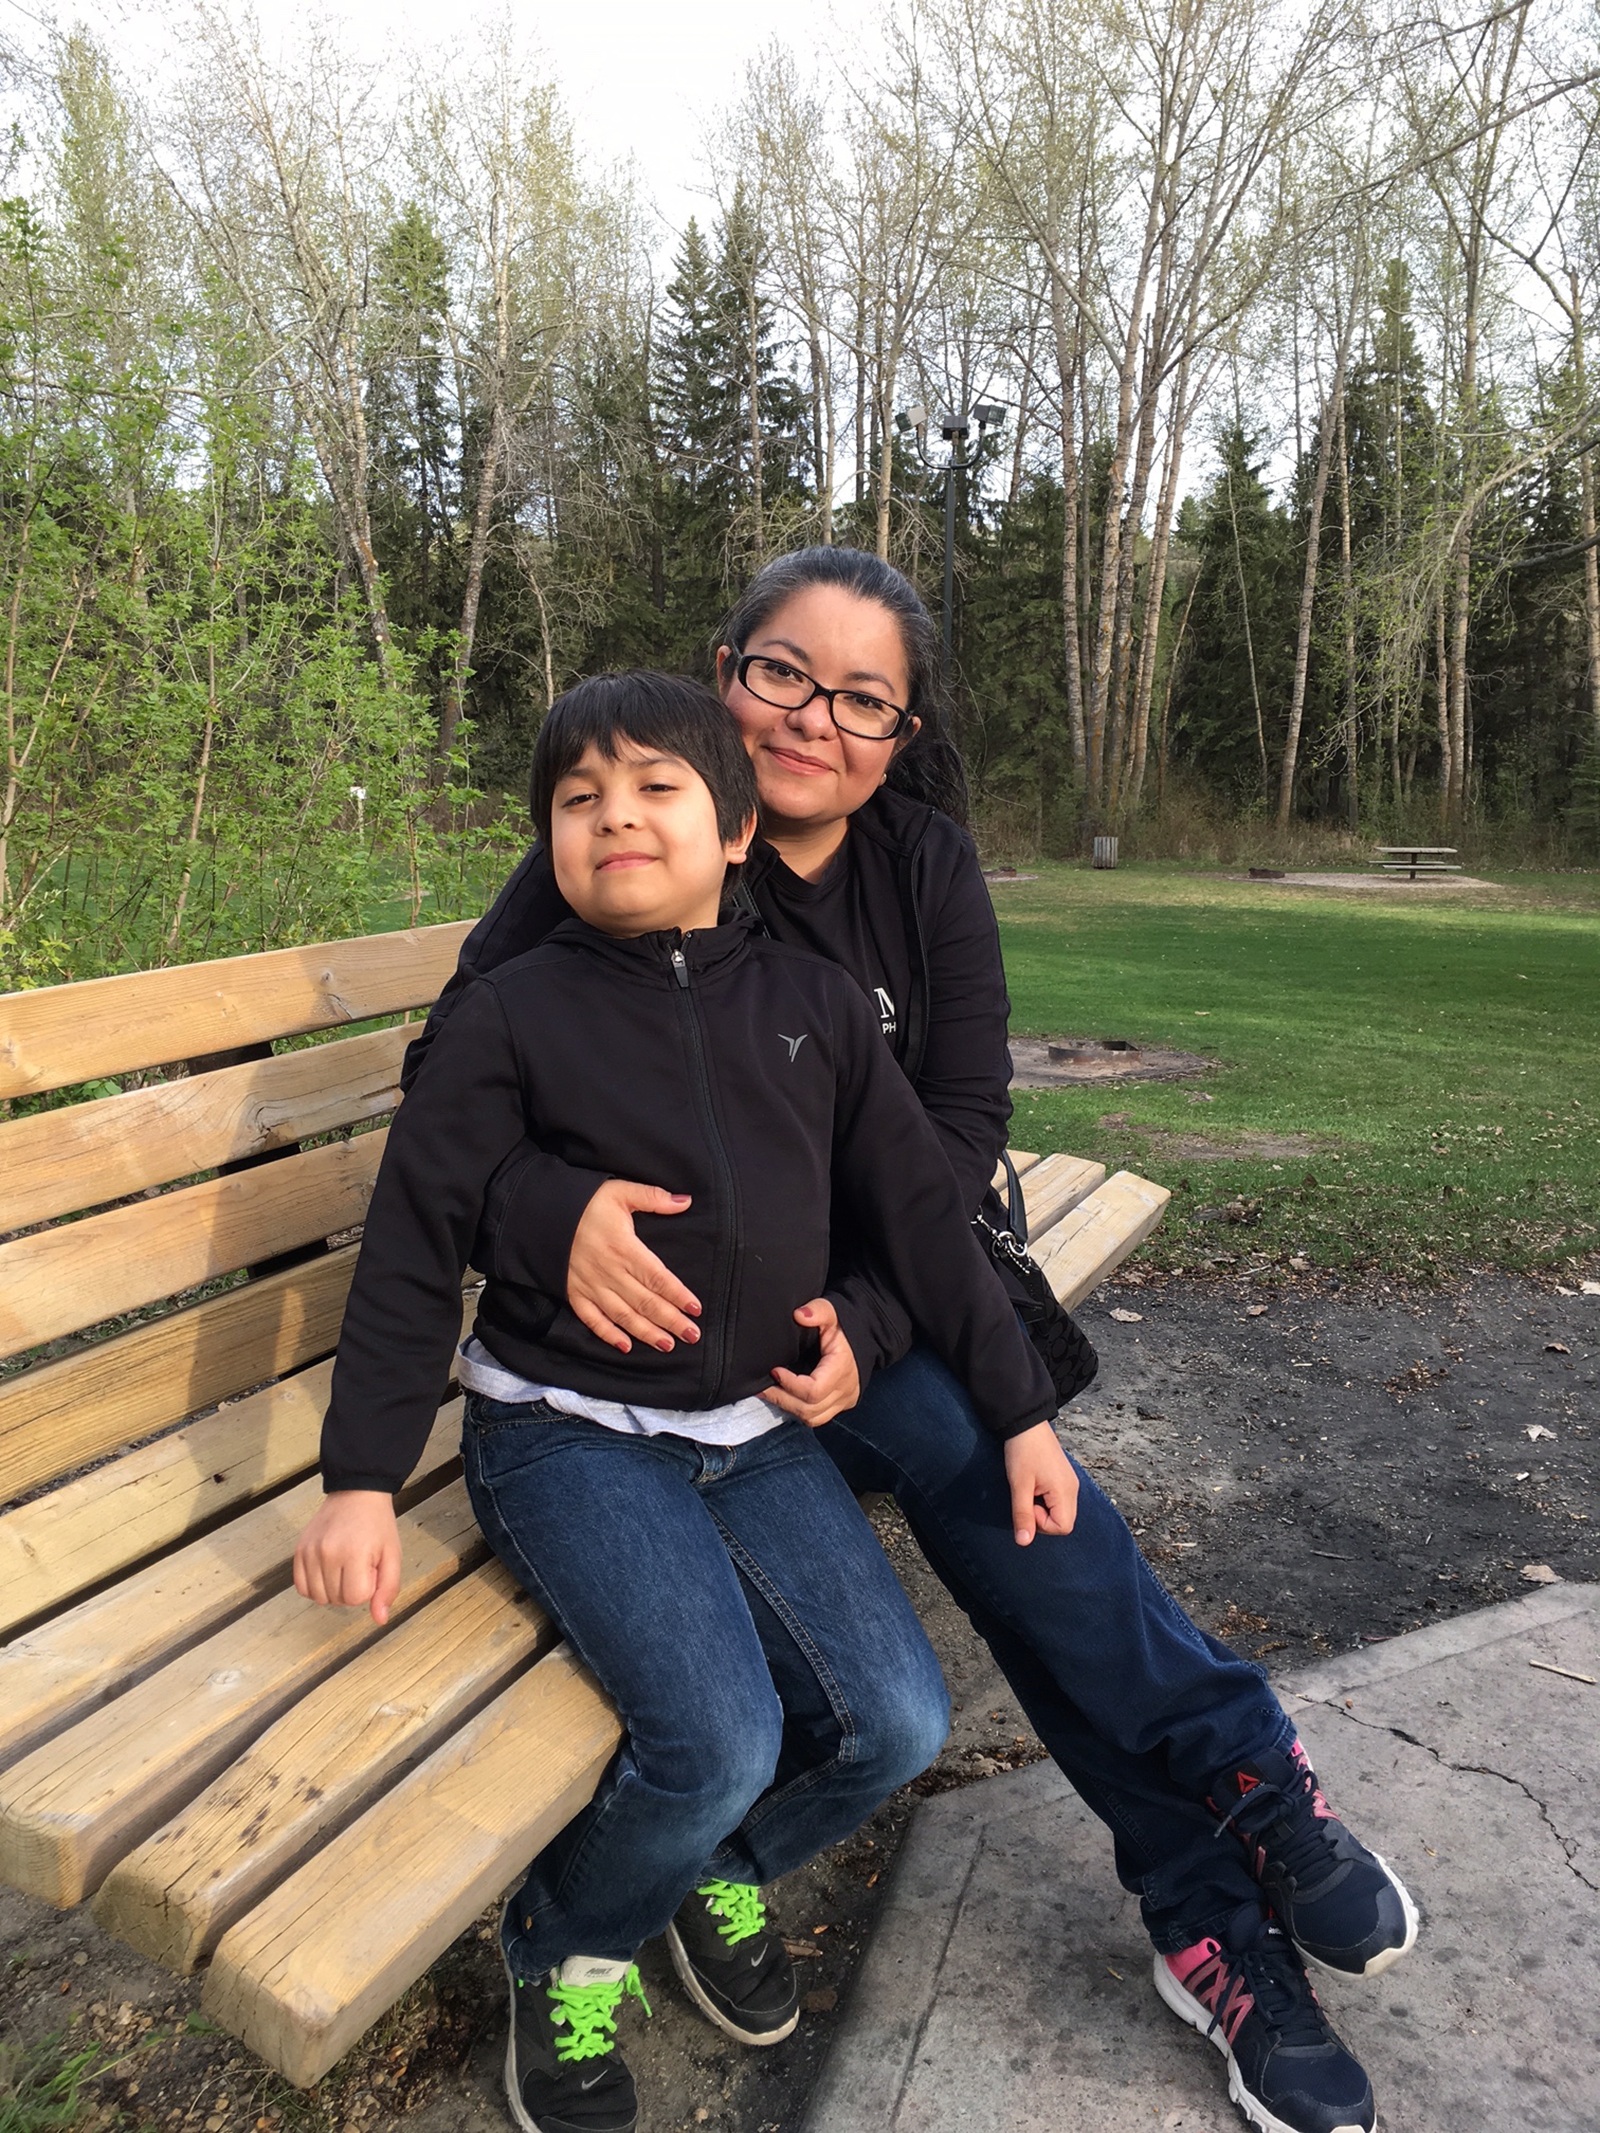 COMMUNITY SUPPORT - Martha Ovalle is the volunteer coordinator organizing the Walk to Fight Arthritis on June 4th at Kiwanis Picnic Park. Her motivation to get onboard is her nine-year-old son Eric